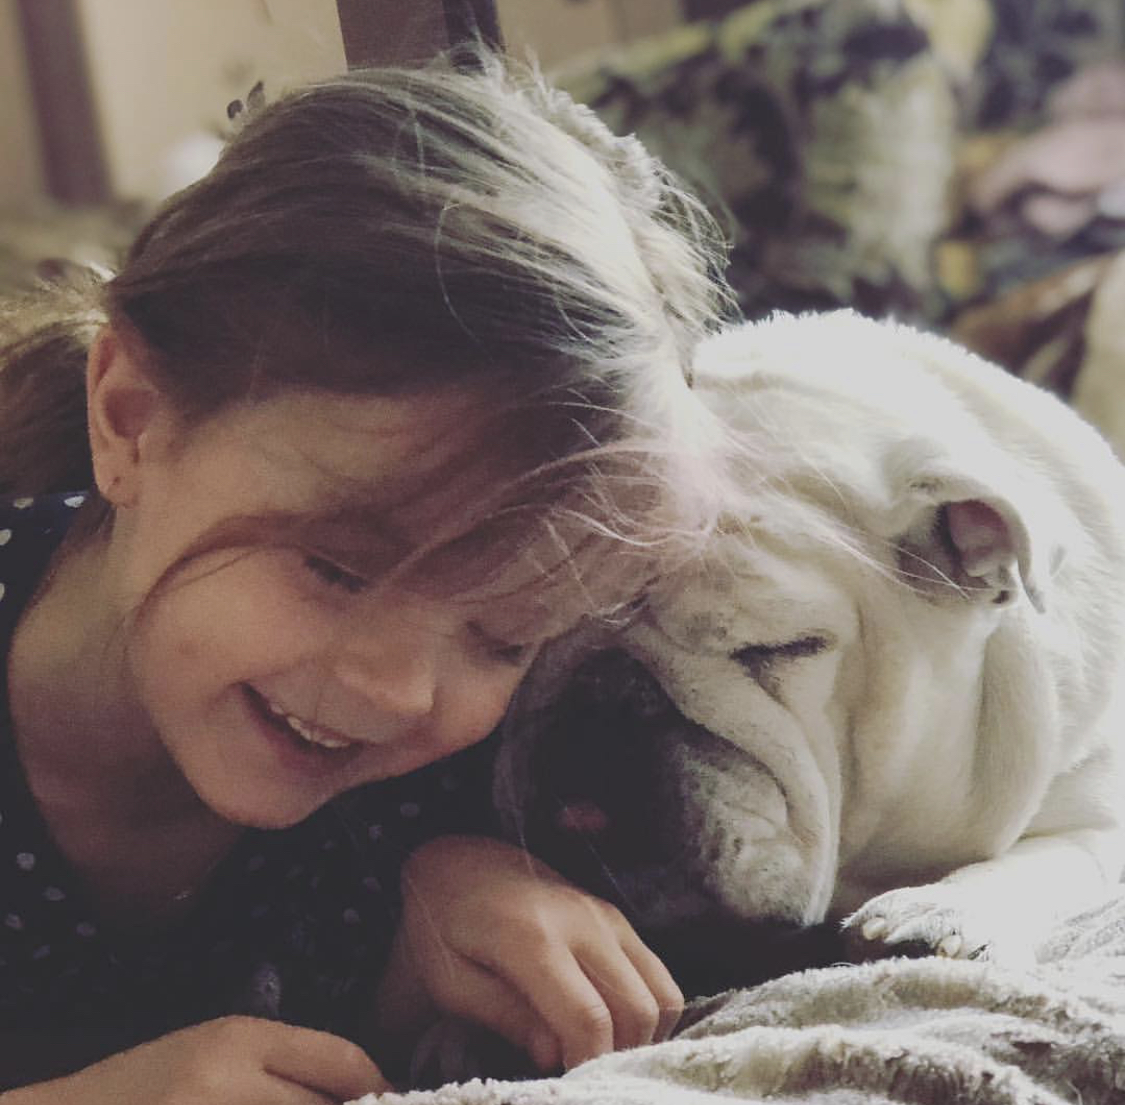 A little girl on the couch beside a sleeping English Bulldog